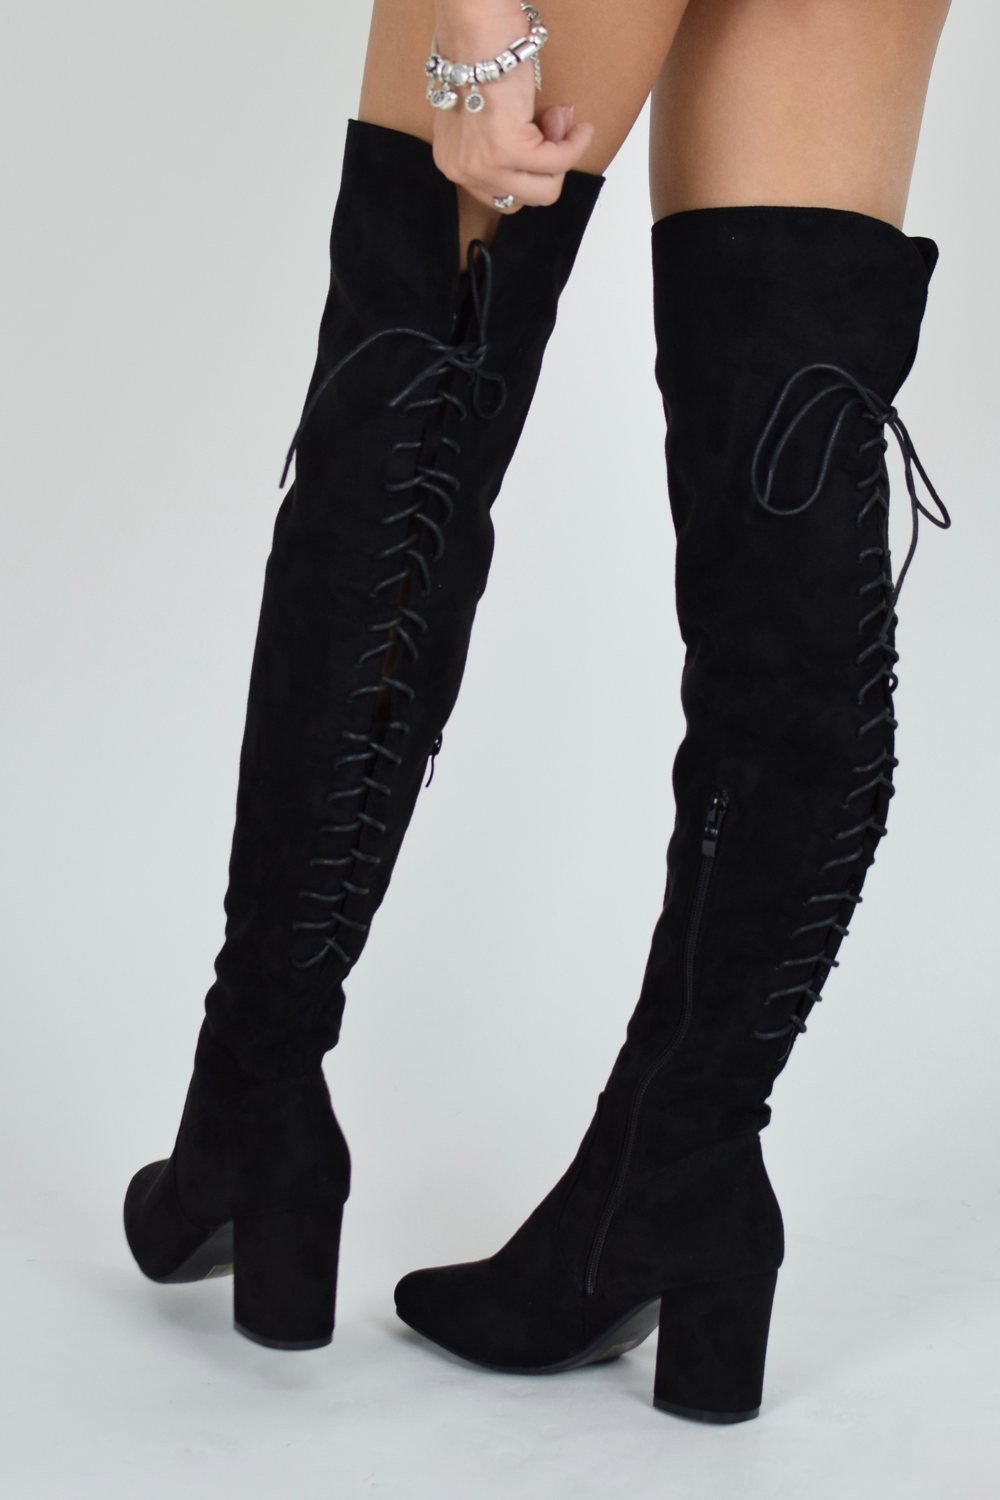 high hopes lace up block heel over knee boots - black suede - bfgmpxl